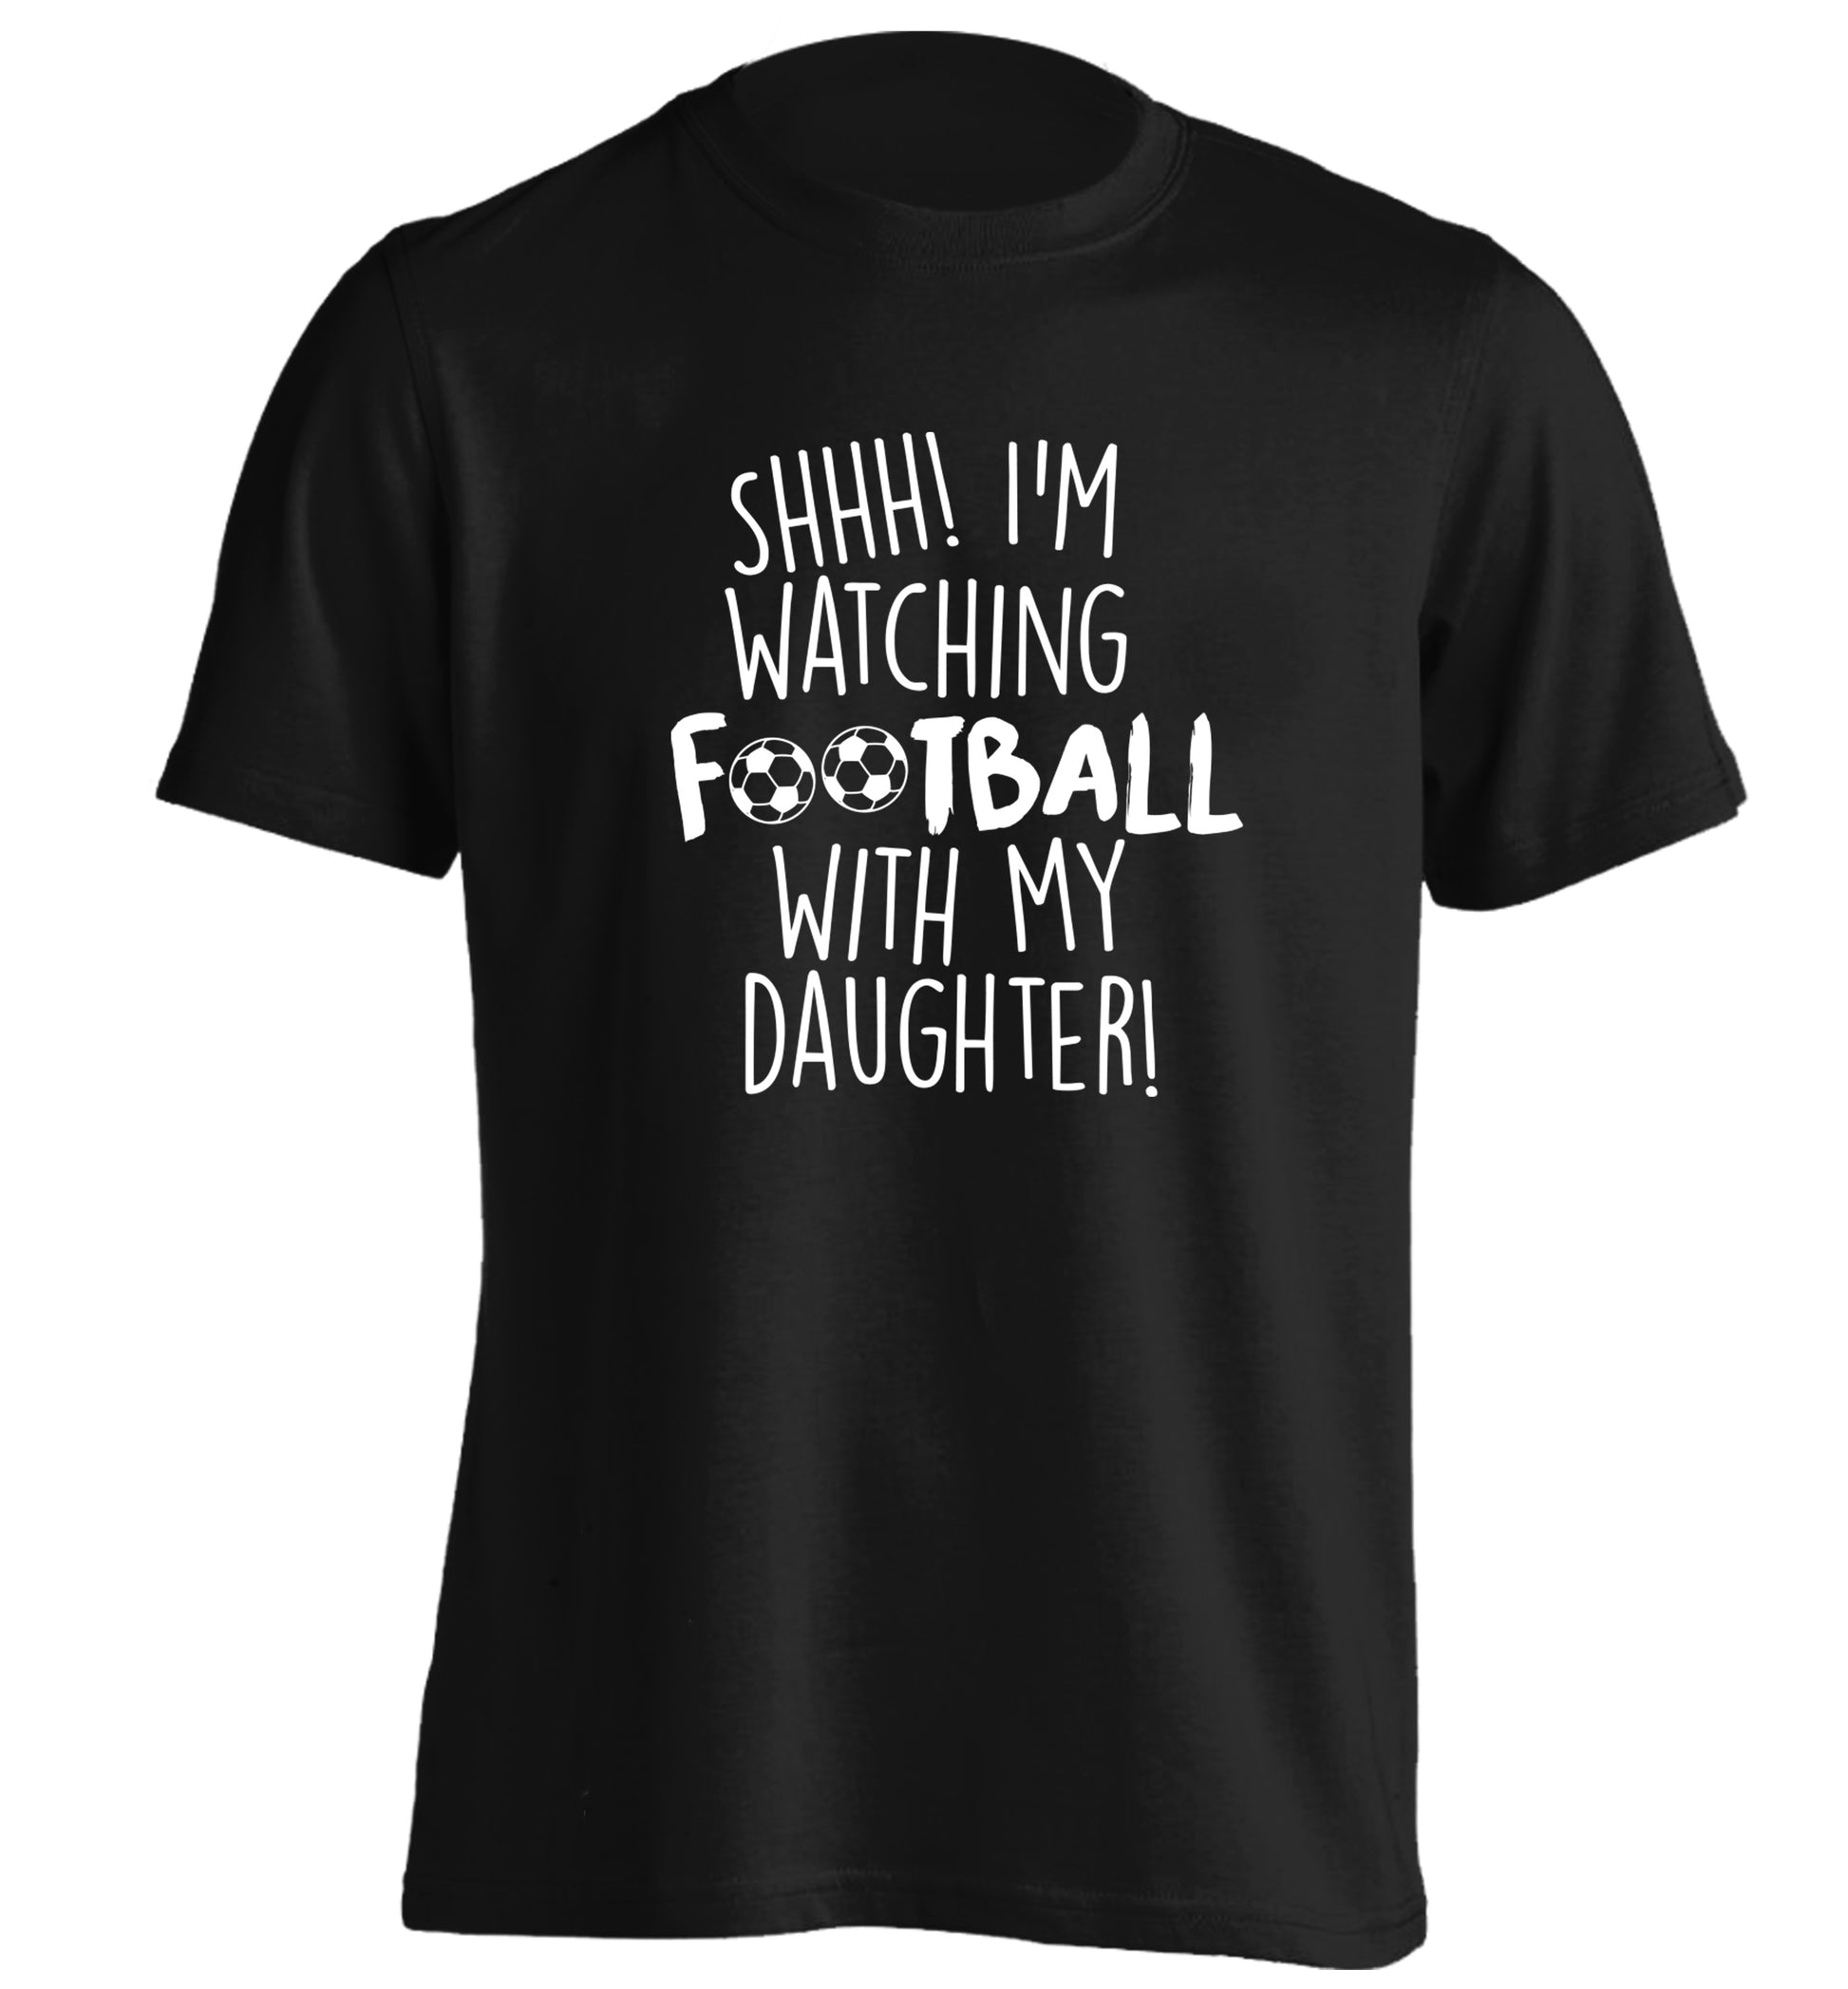 Shhh I'm watching football with my daughter adults unisexblack Tshirt 2XL